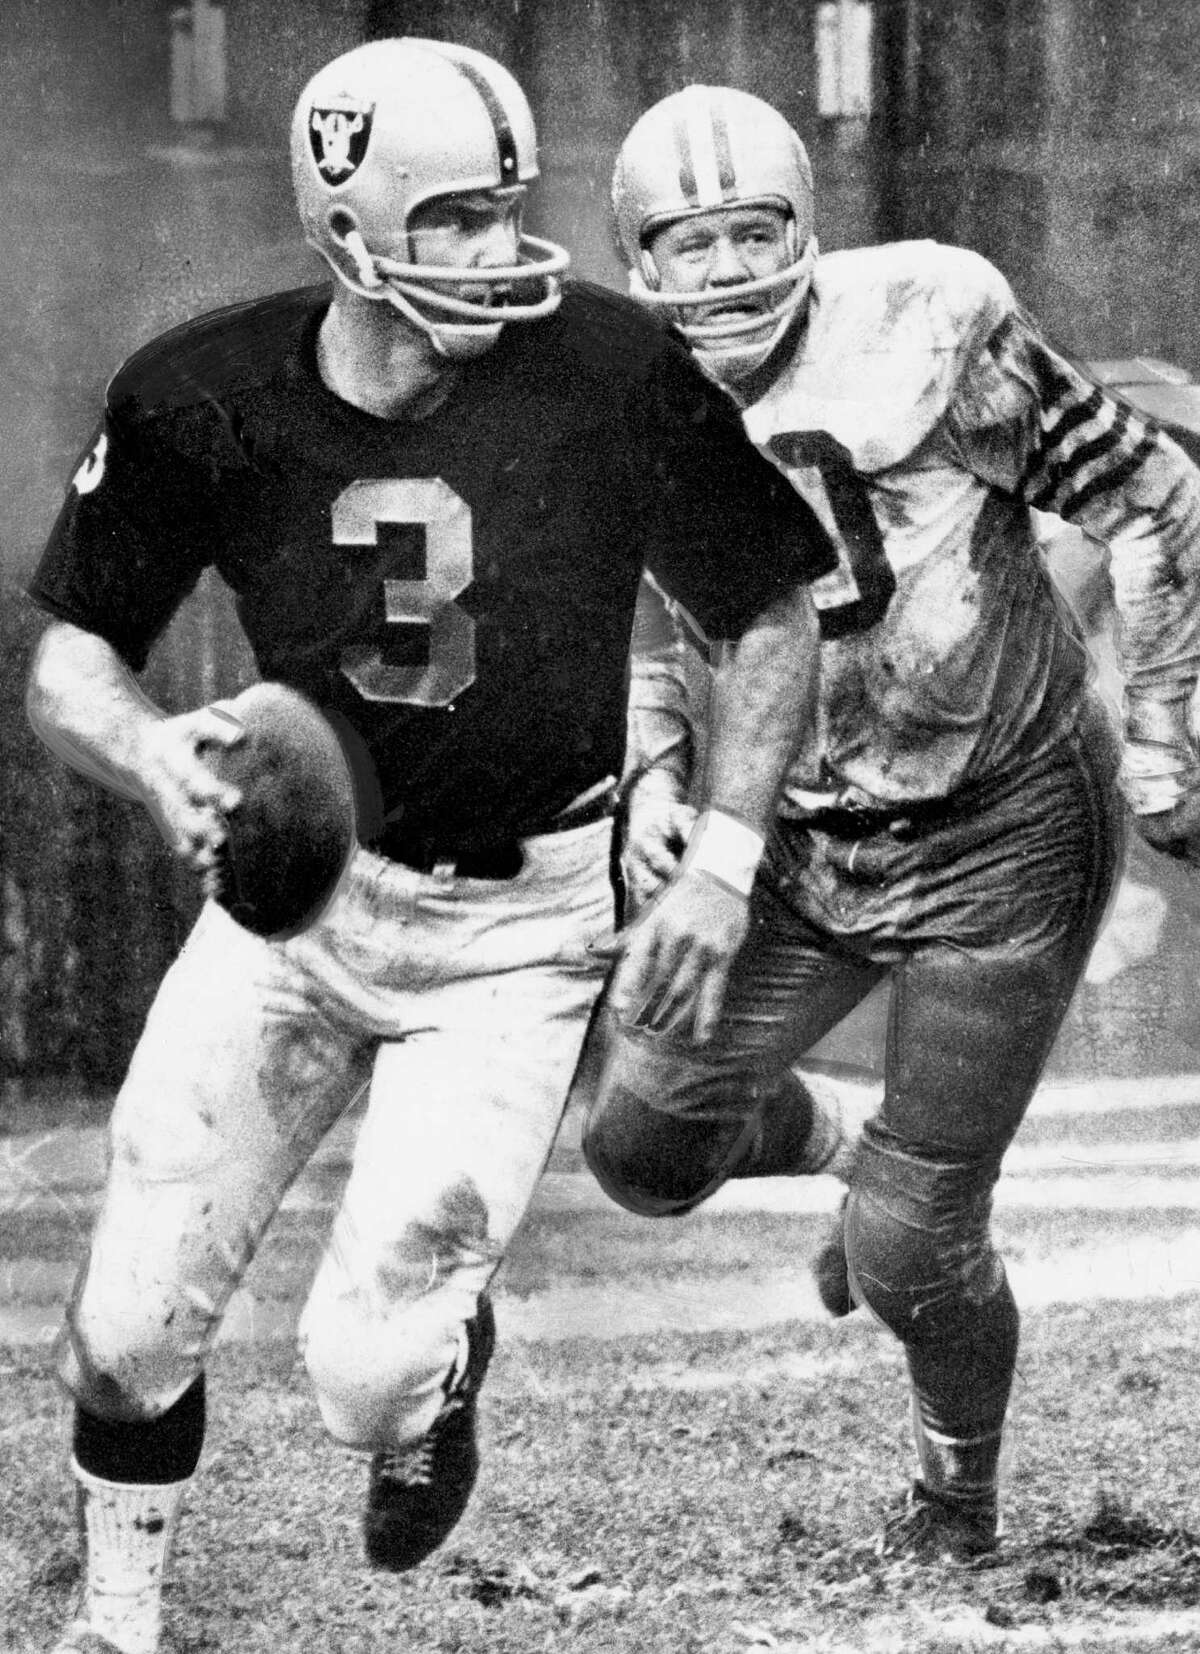 Daryle Lamonica threw 30 touchdown passes in 1967, and would acquire the nickname “The mad Bomber”.